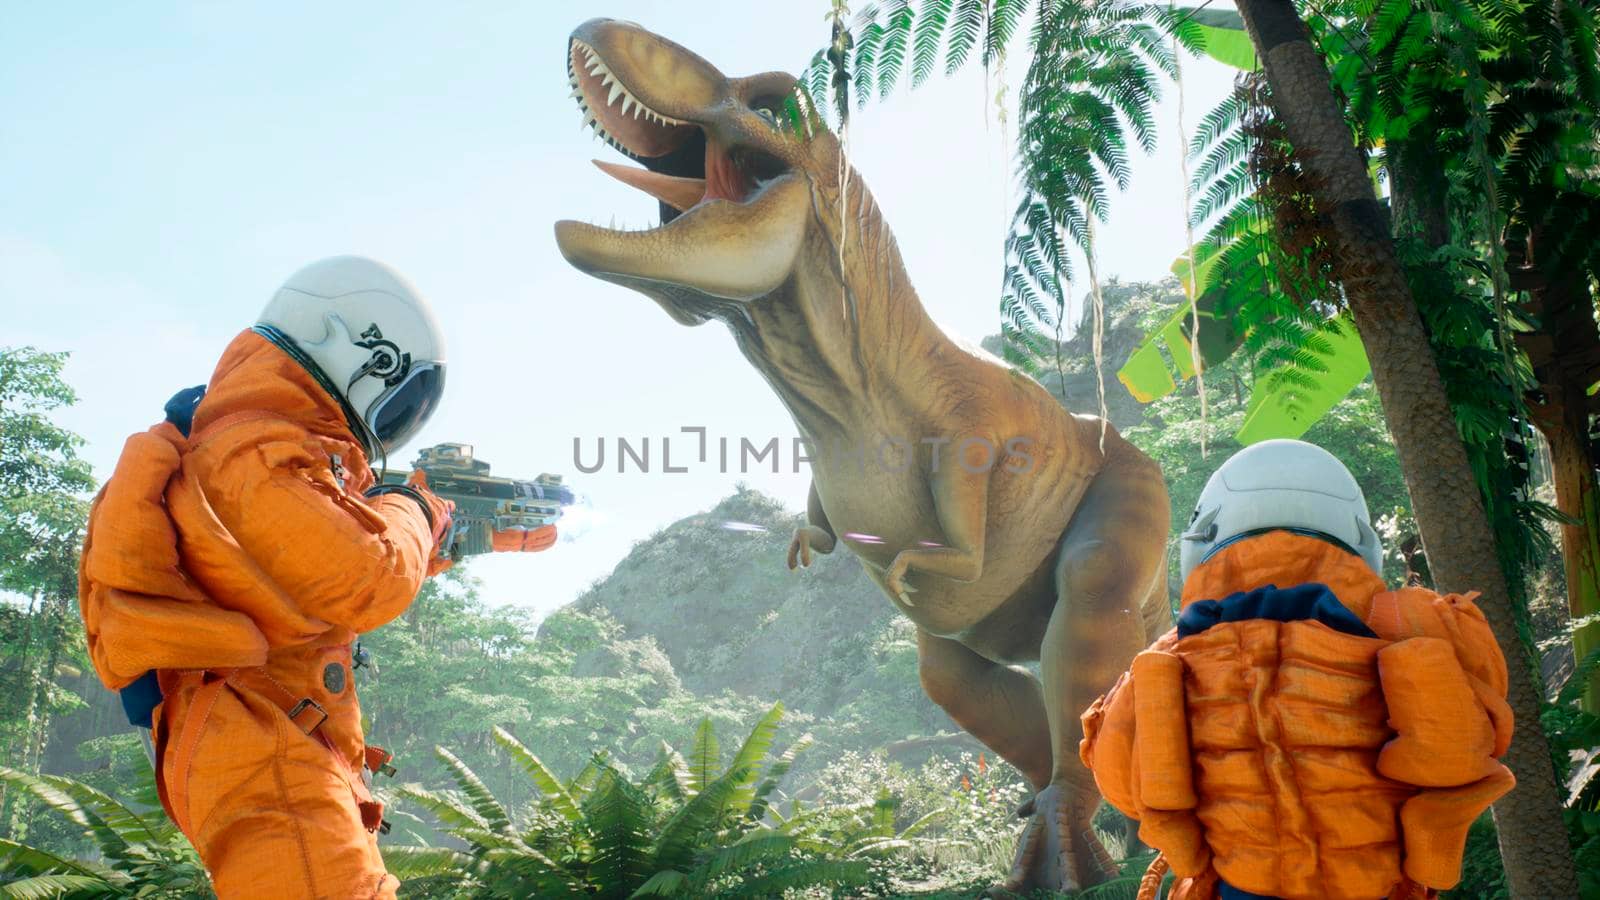 A meeting of two time-traveler astronauts and a predatory Tyrannosaurus rex in a prehistoric Jurassic park. 3D Rendering. by designprojects